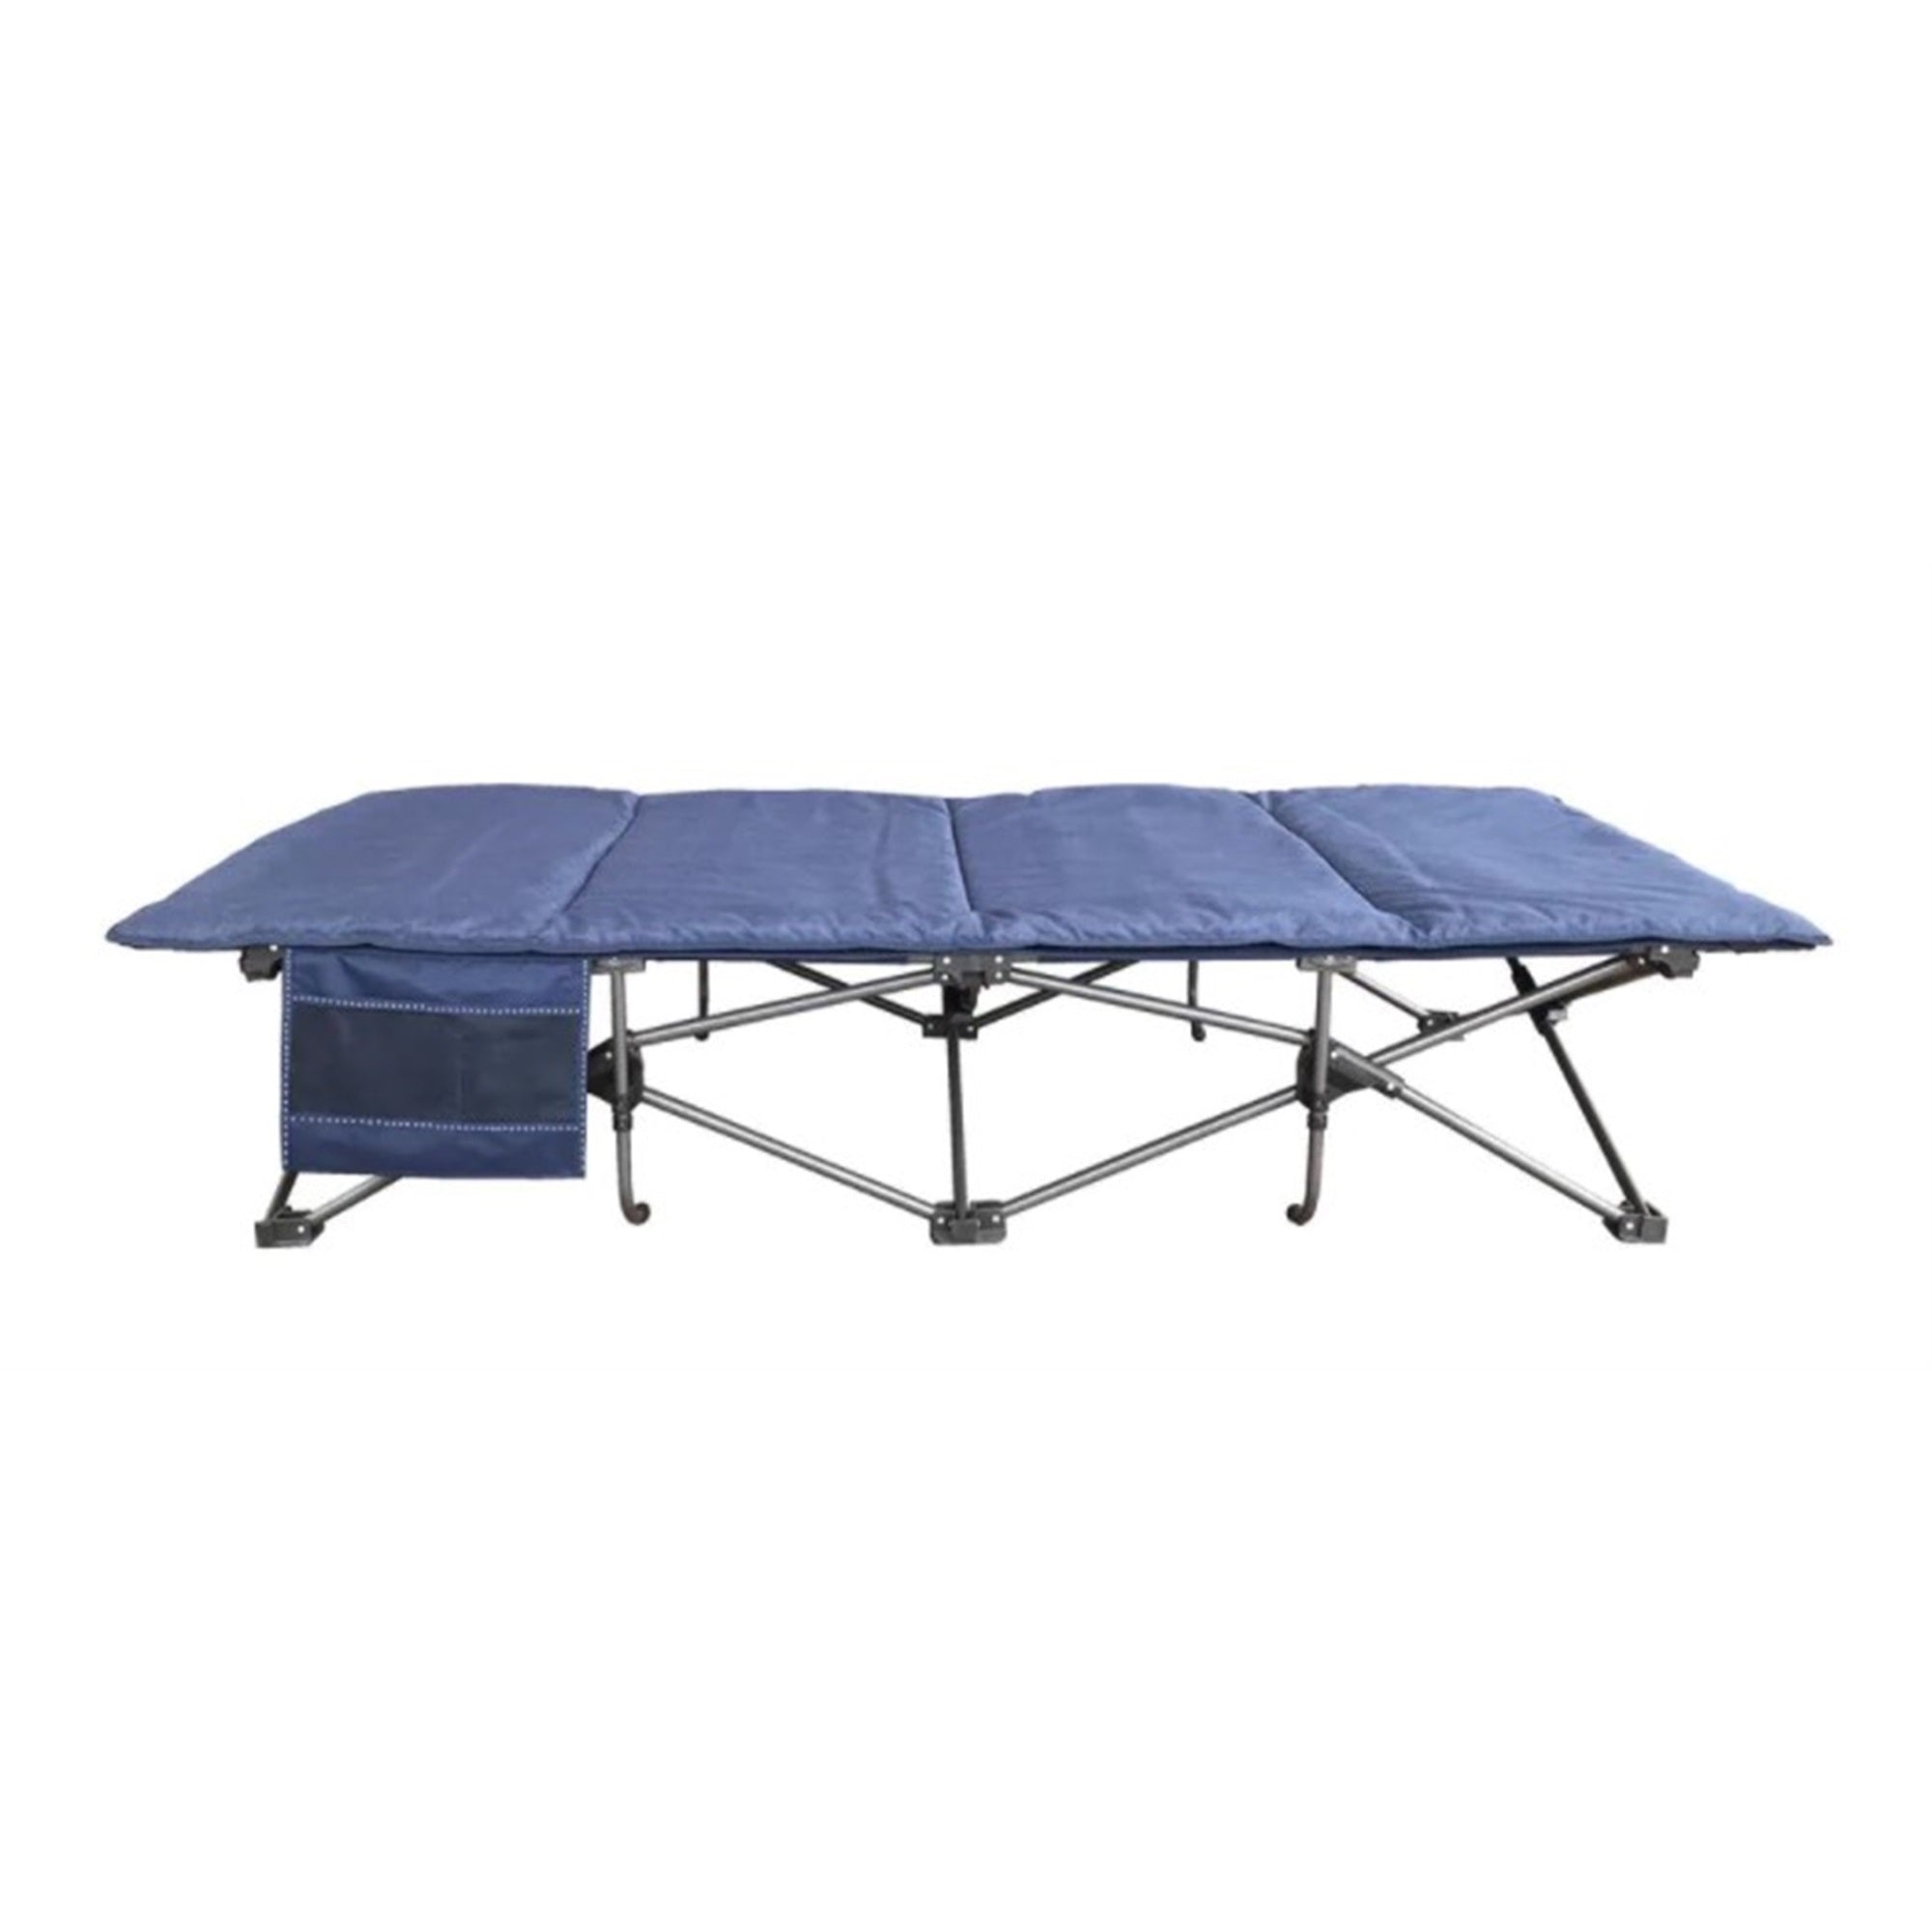 Zenithen Limited Blue Self Enclosing Portable Cot with Padding, Dark Blue, 78 Long